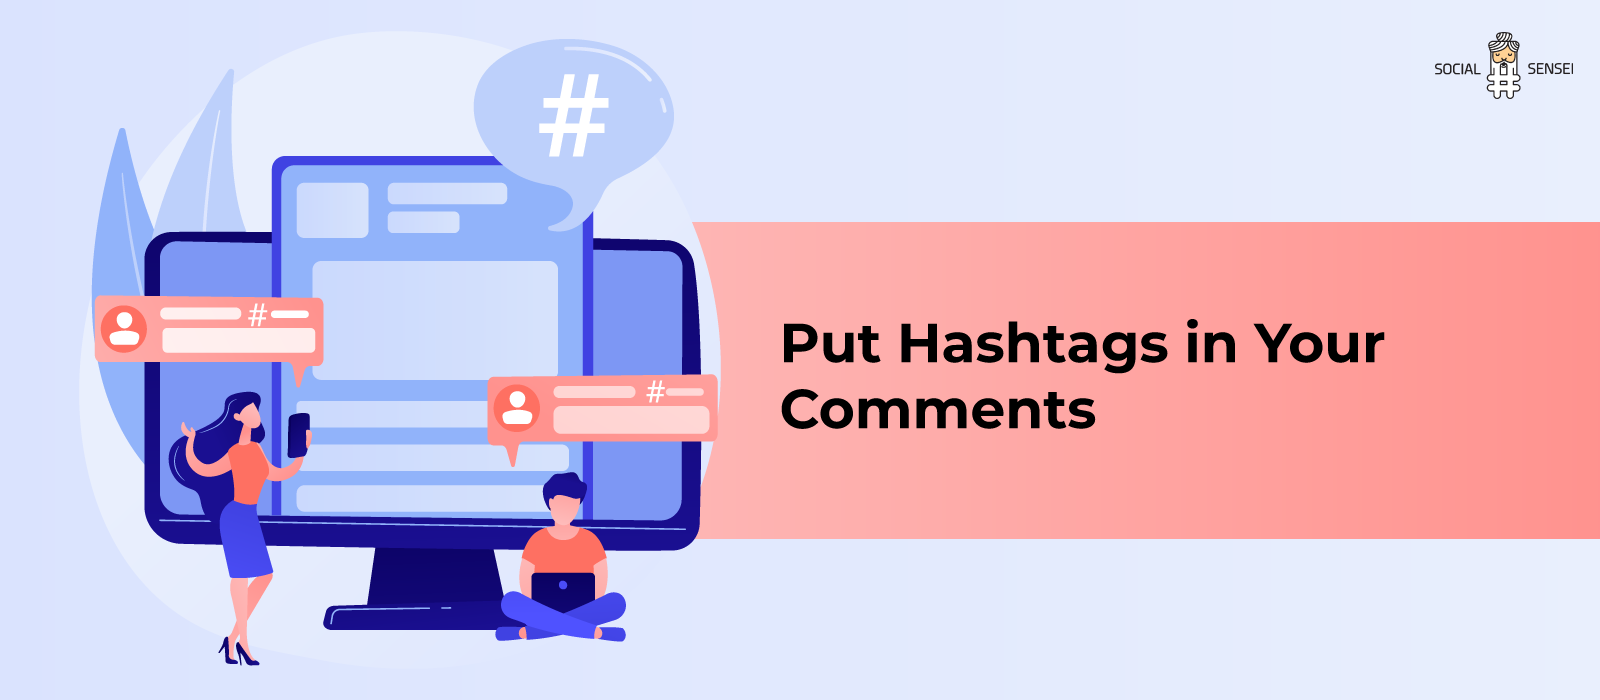 Put Hashtags in Your Comments